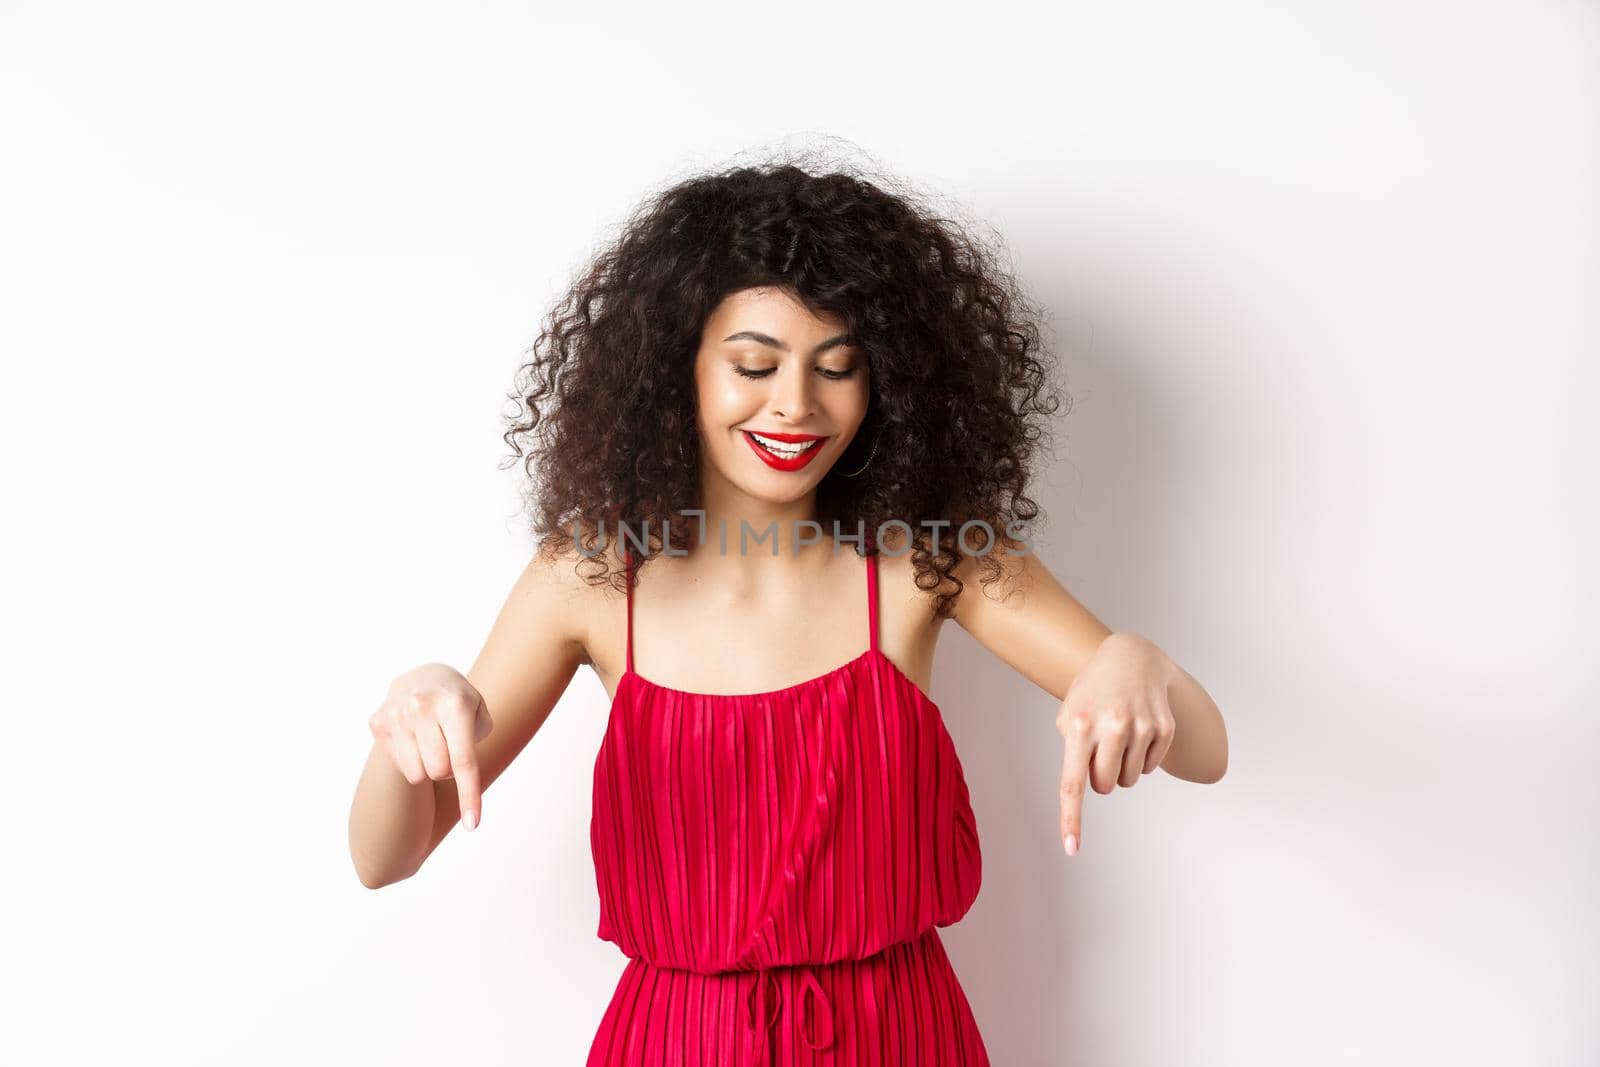 Cheerful elegant woman in red dress and makeup, looking and pointing down with pleased smile, showing advertisement, standing over white background.